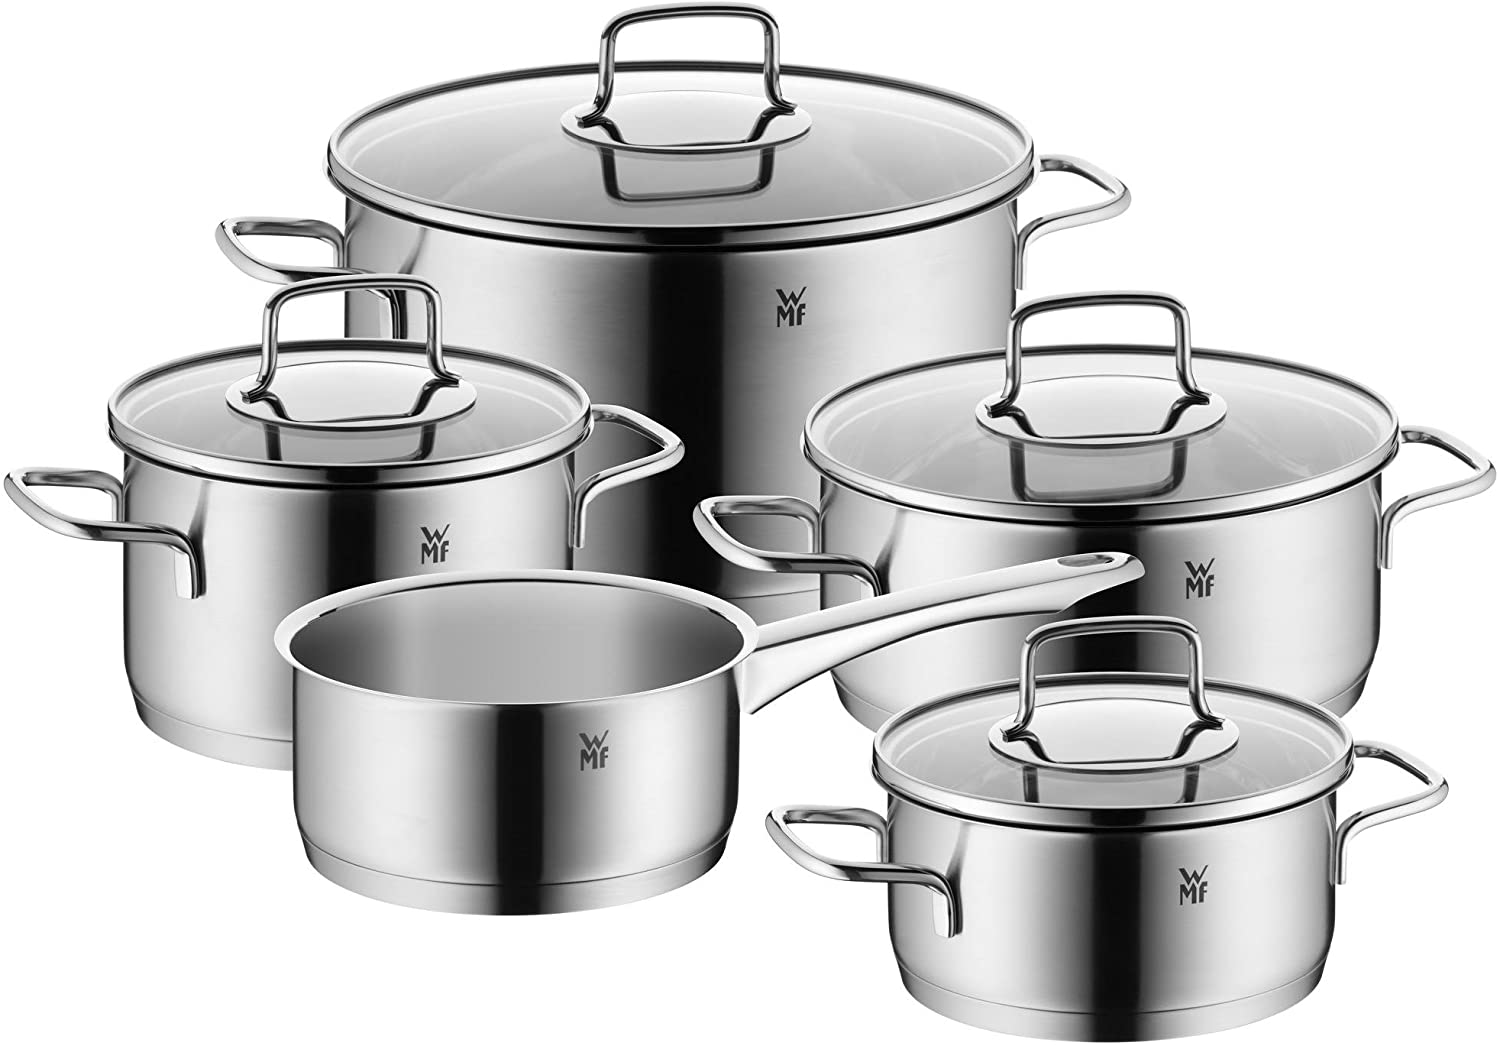 WMF Merano Induction Cooking Pot Set with Glass Lid, Polished Cromargan Stainless Steel, Induction Pots Set, Uncoated